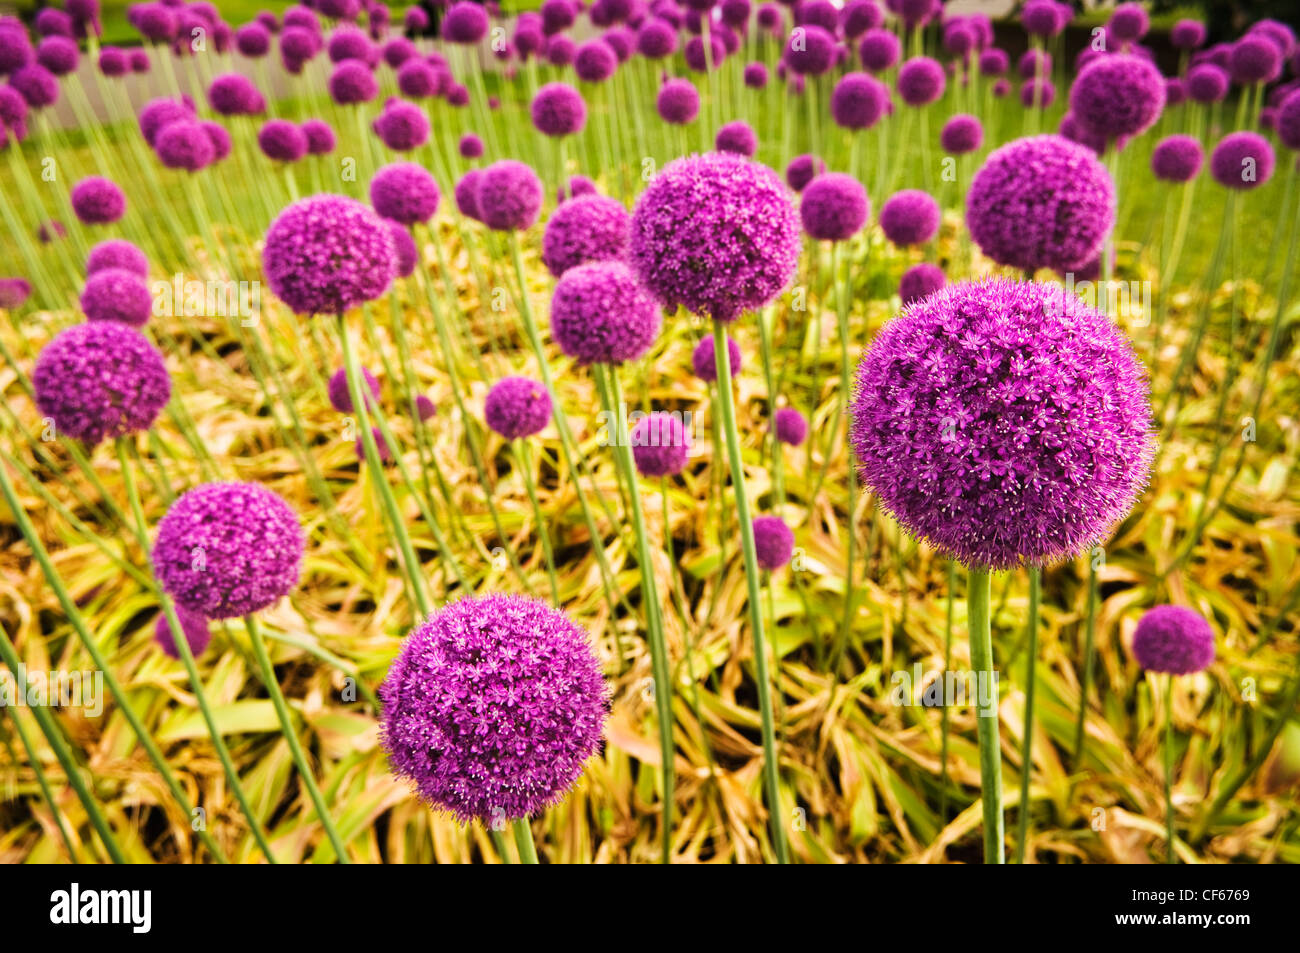 Violet round flowers at Kew Gardens. Stock Photo